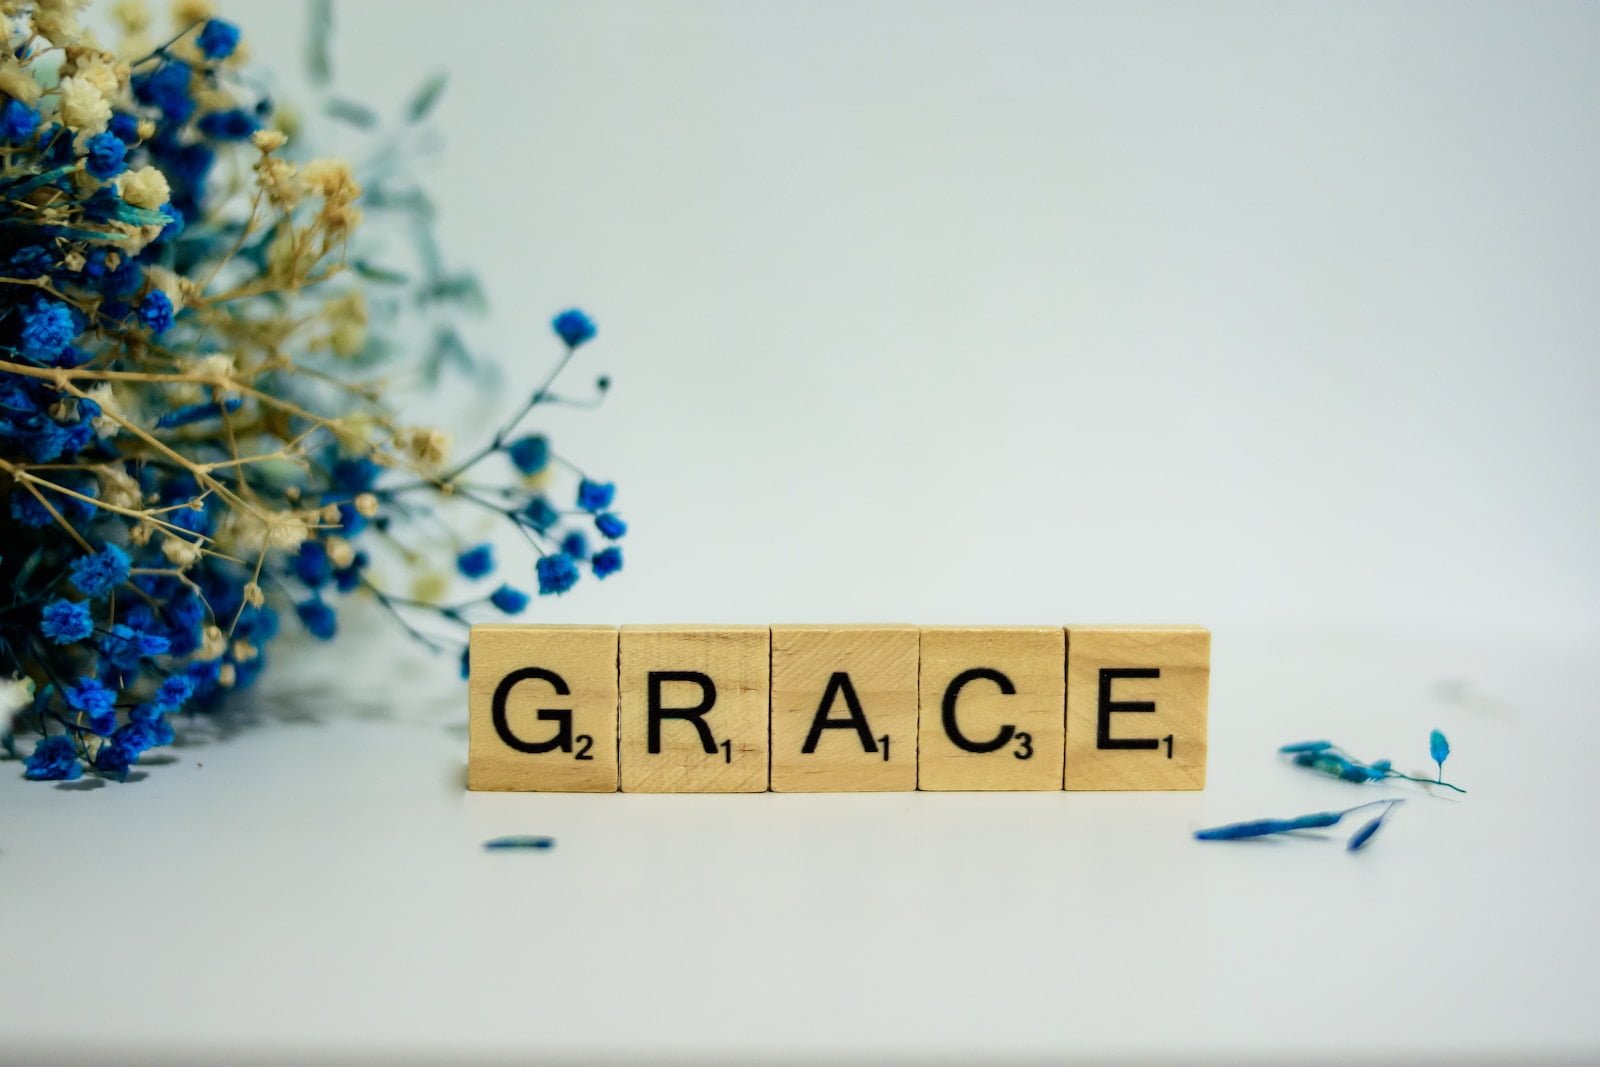 empowered by grace